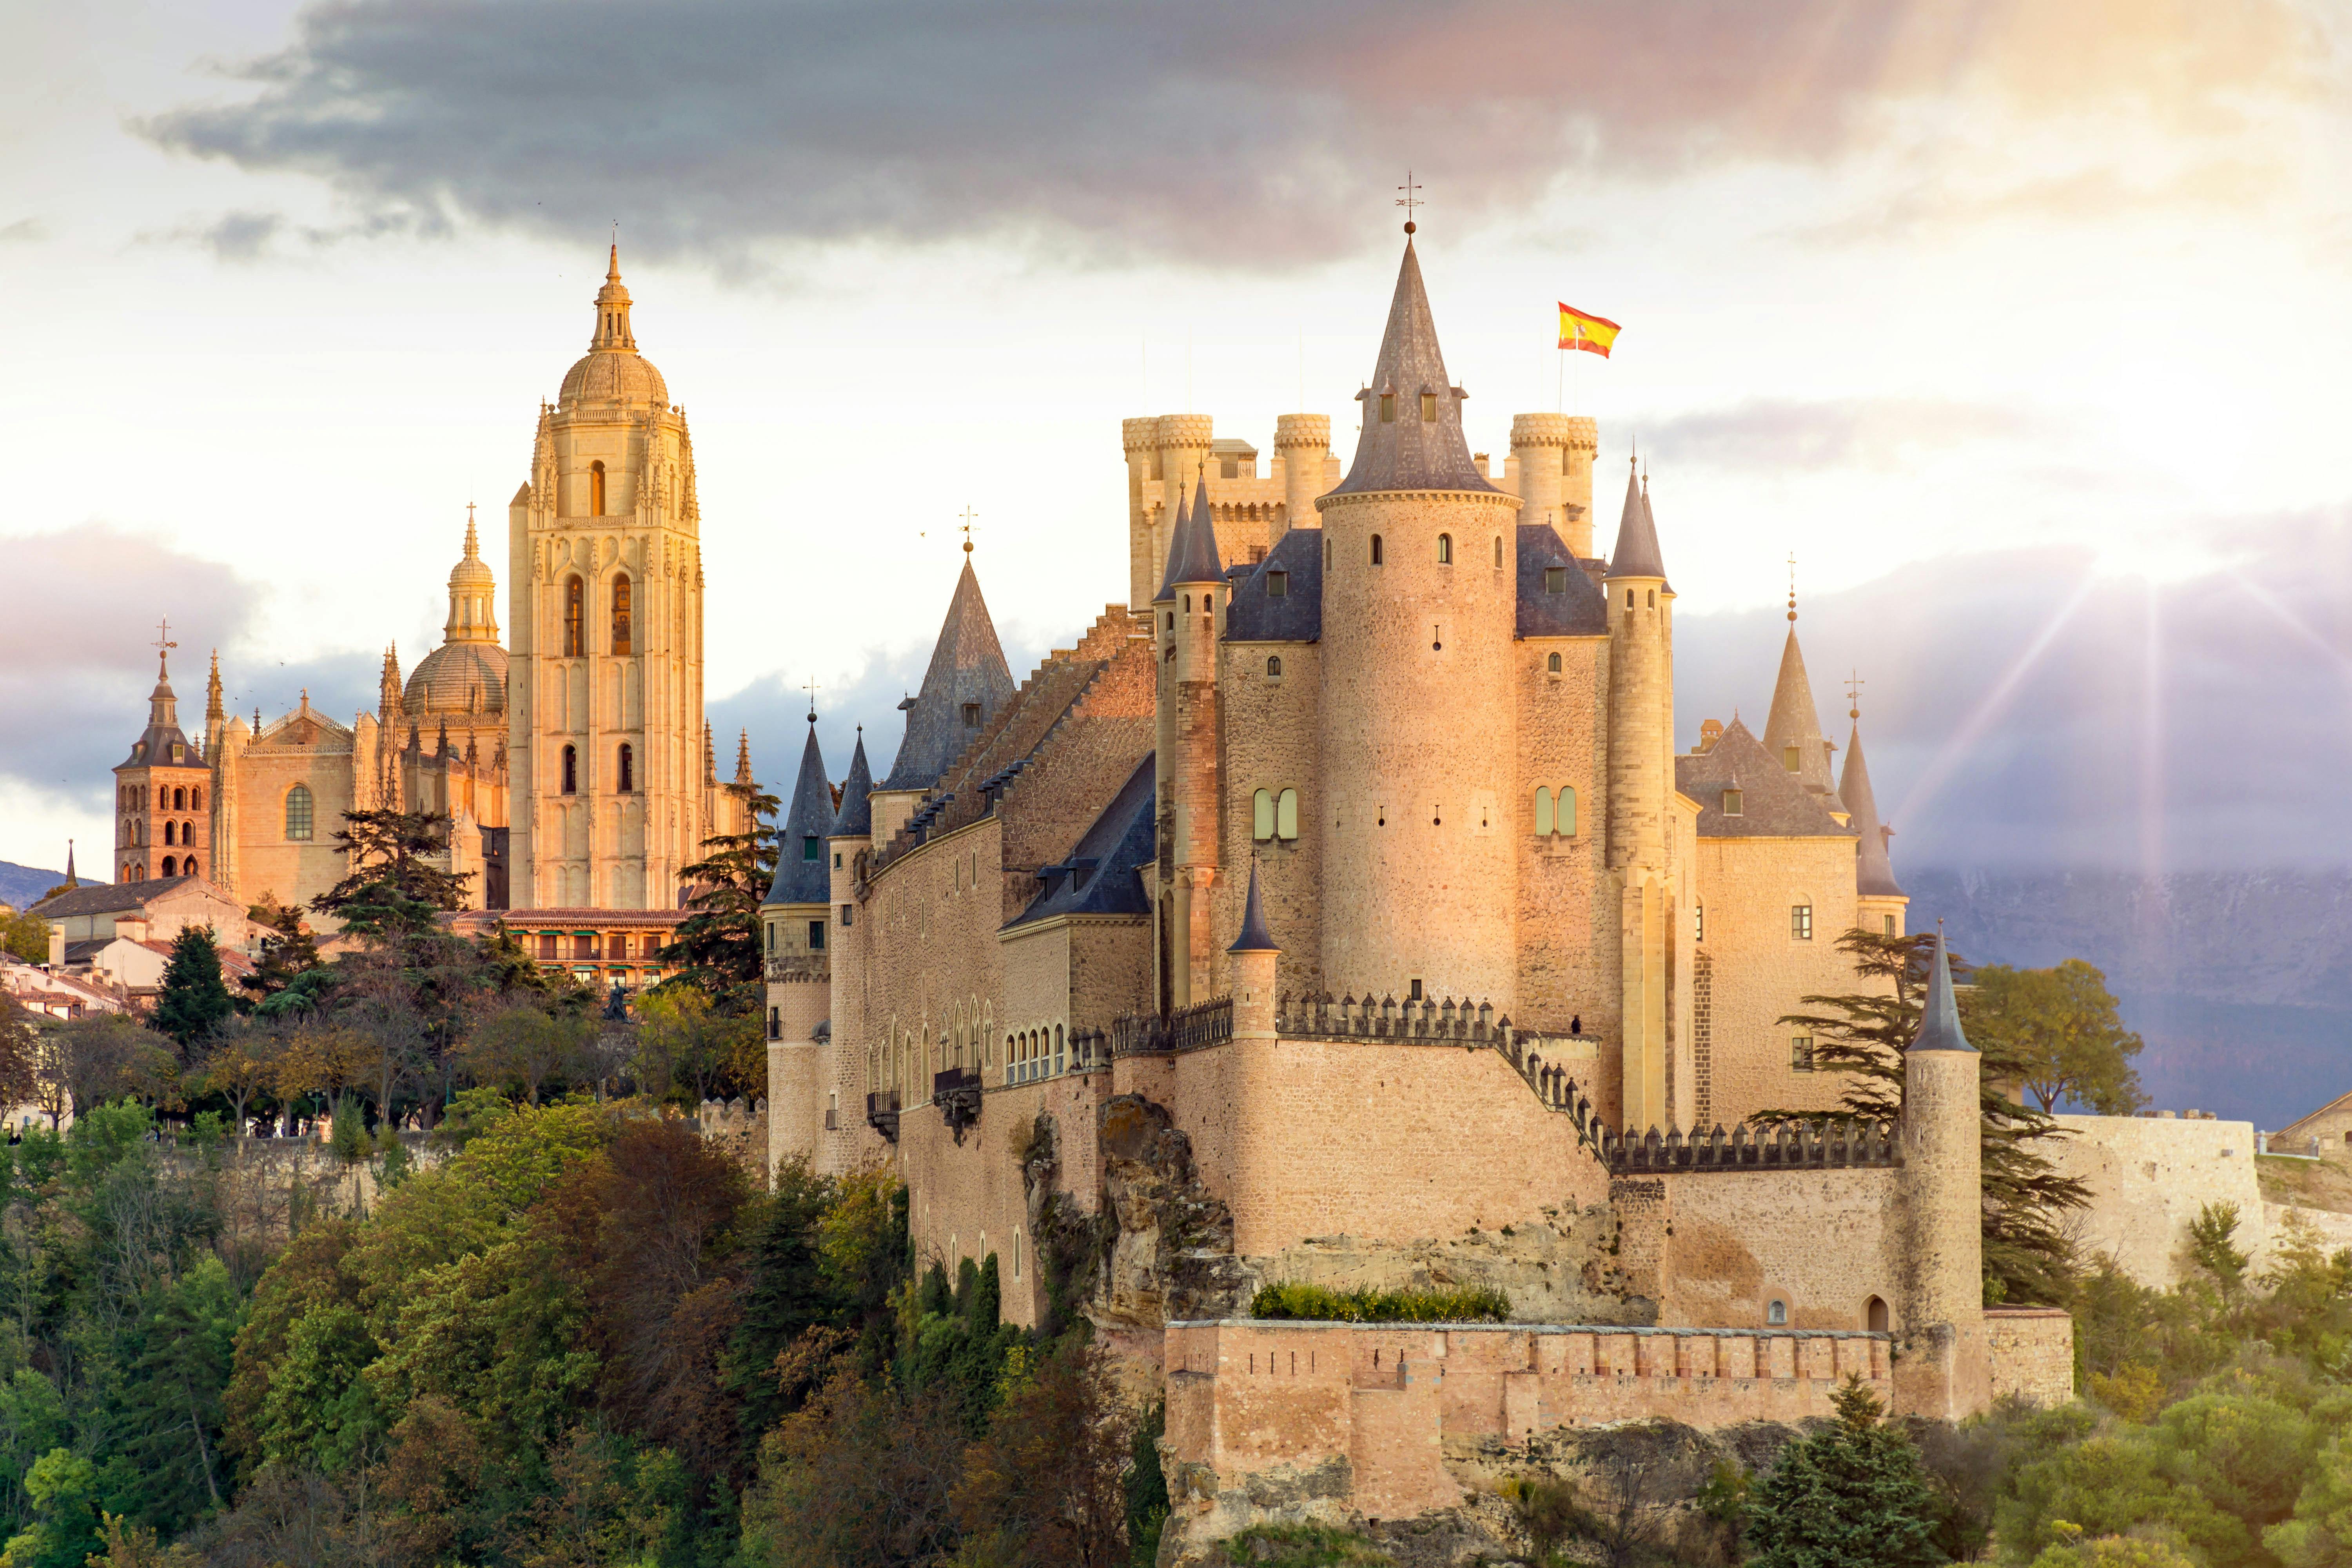 Ávila and Segovia full-day tour from Madrid with tickets included